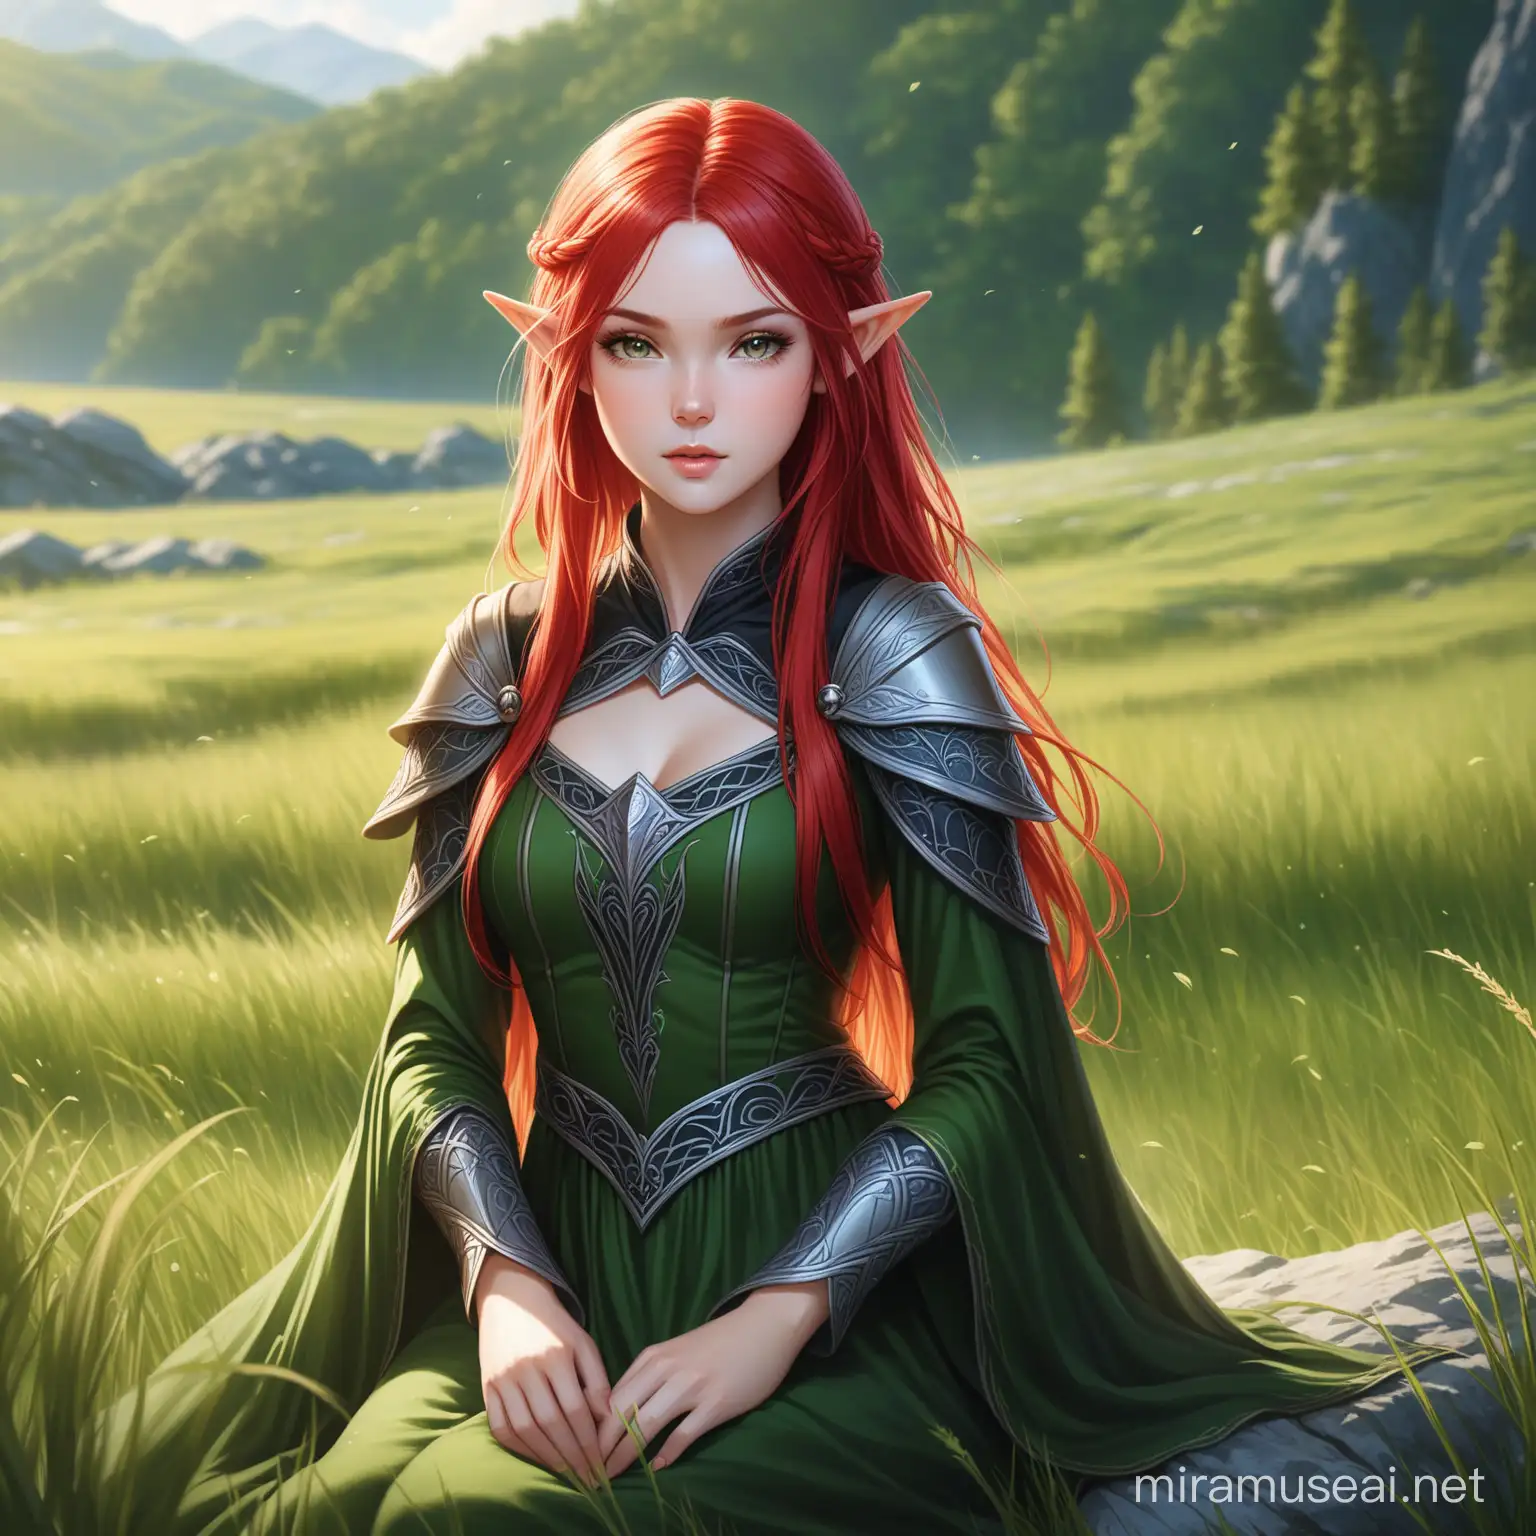 Elven princess with Black medieval style clothing, red hair, sweet look at camera, sitting on a rock in a grassy field while the wind ruffles her hair, ultra realistic, high definition